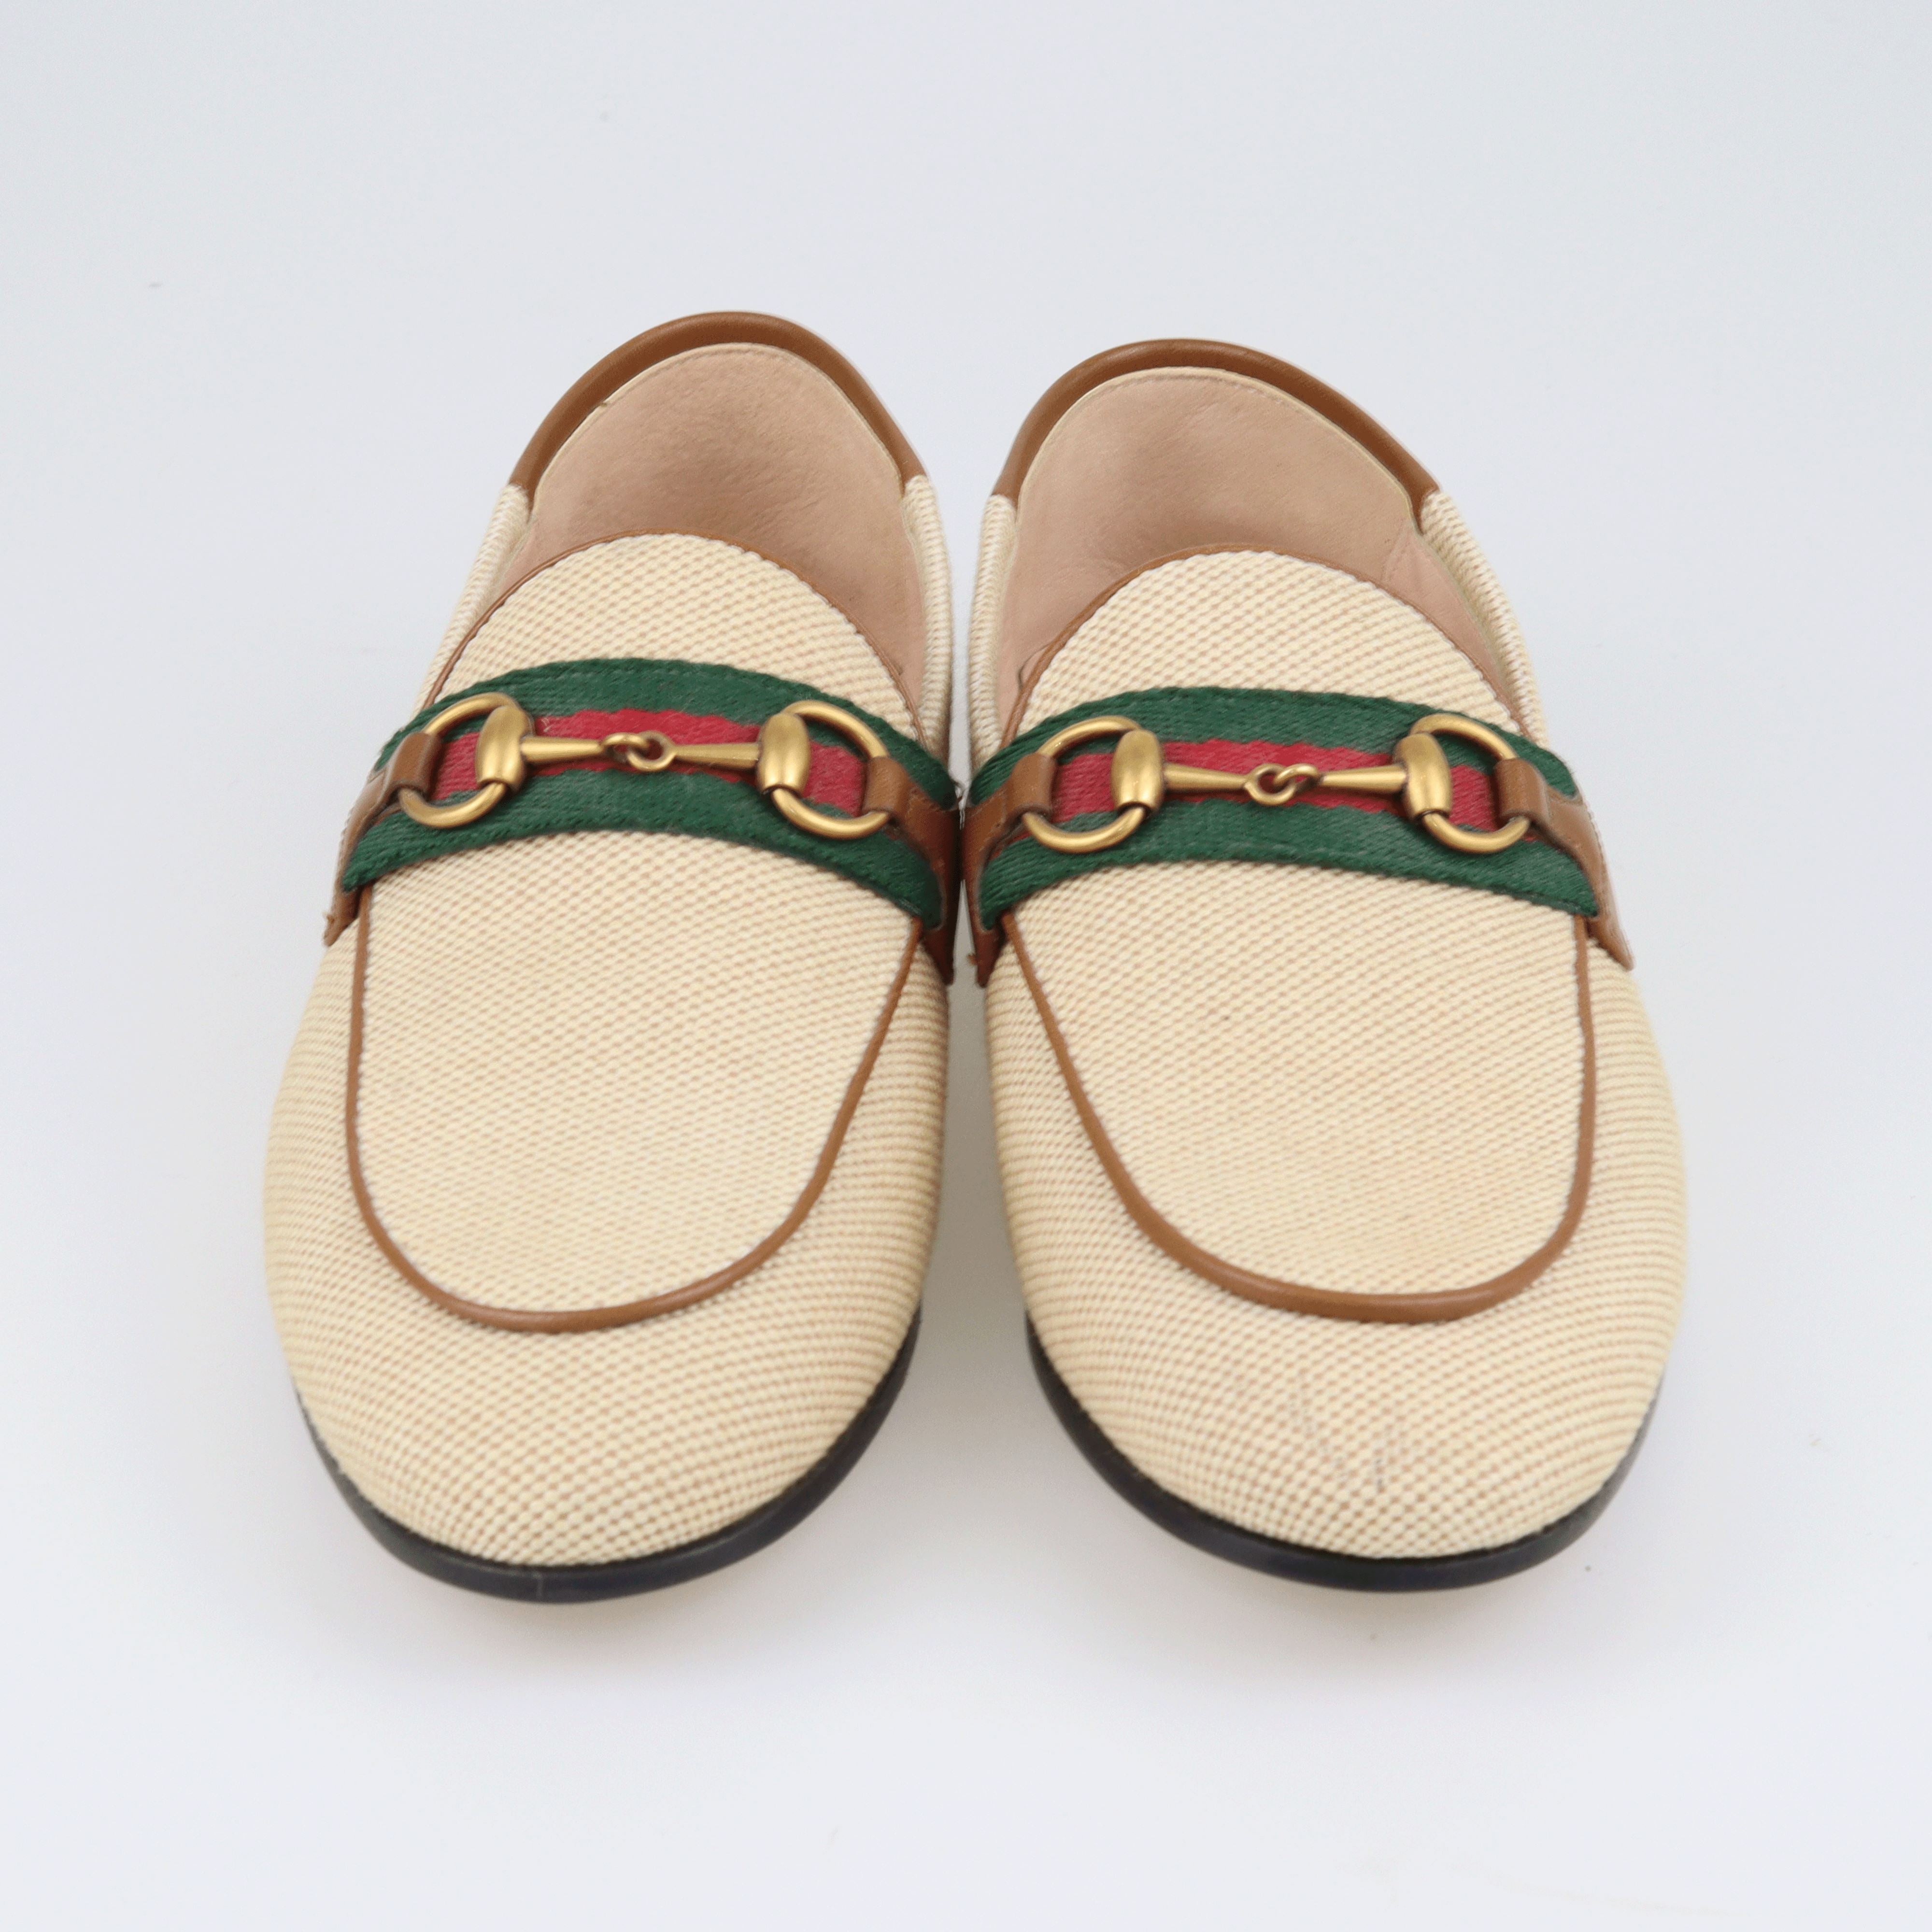 Beige/Brown Brixton Loafer Shoes Gucci 